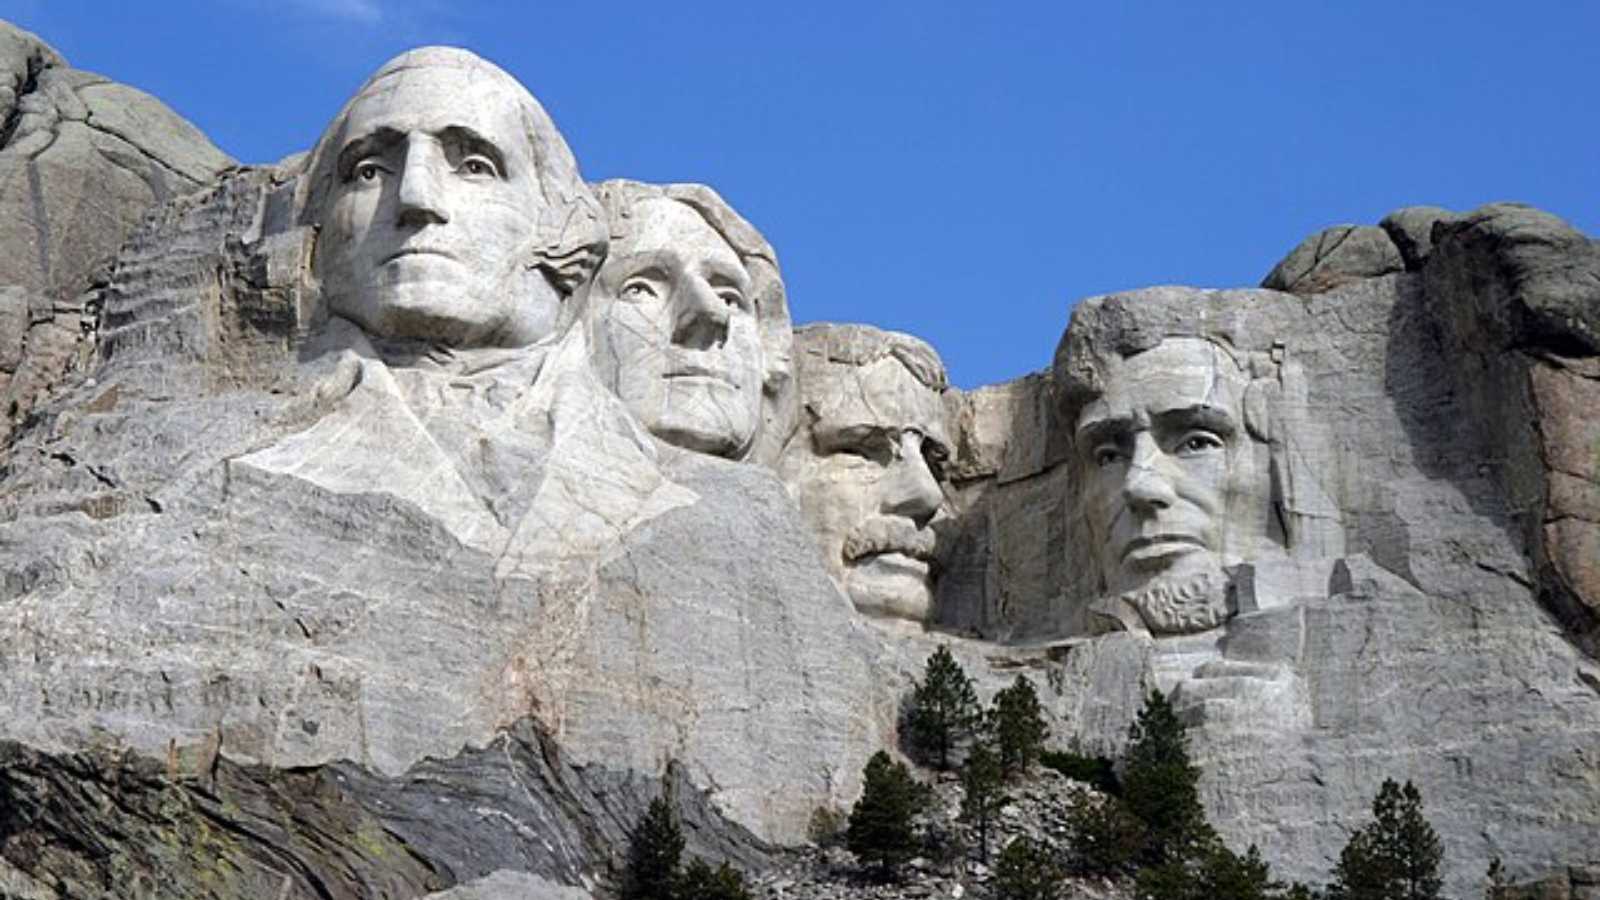 <p><span>Often described as smaller and less impressive in person, Mount Rushmore may not be worth the hype or the drive. It's one of those "</span><i><span>you've seen it once, you've seen it all</span></i><span>" places.</span></p>